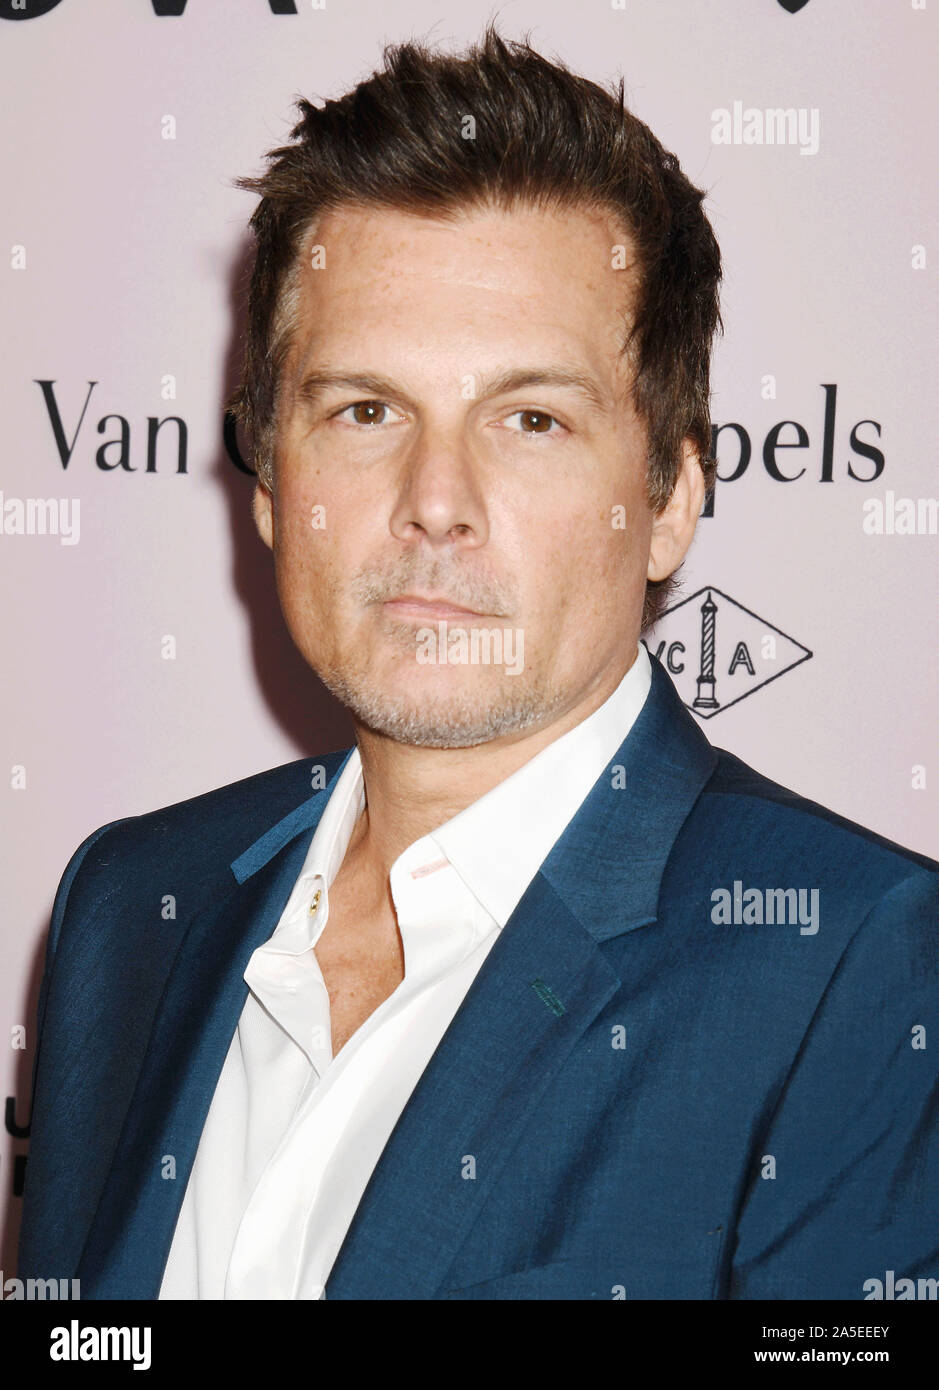 LOS ANGELES, CA - OCTOBER 19: Len Wiseman attends L.A. Dance Project's Annual Gala at Hauser & Wirth on October 19, 2019 in Los Angeles, California. Stock Photo